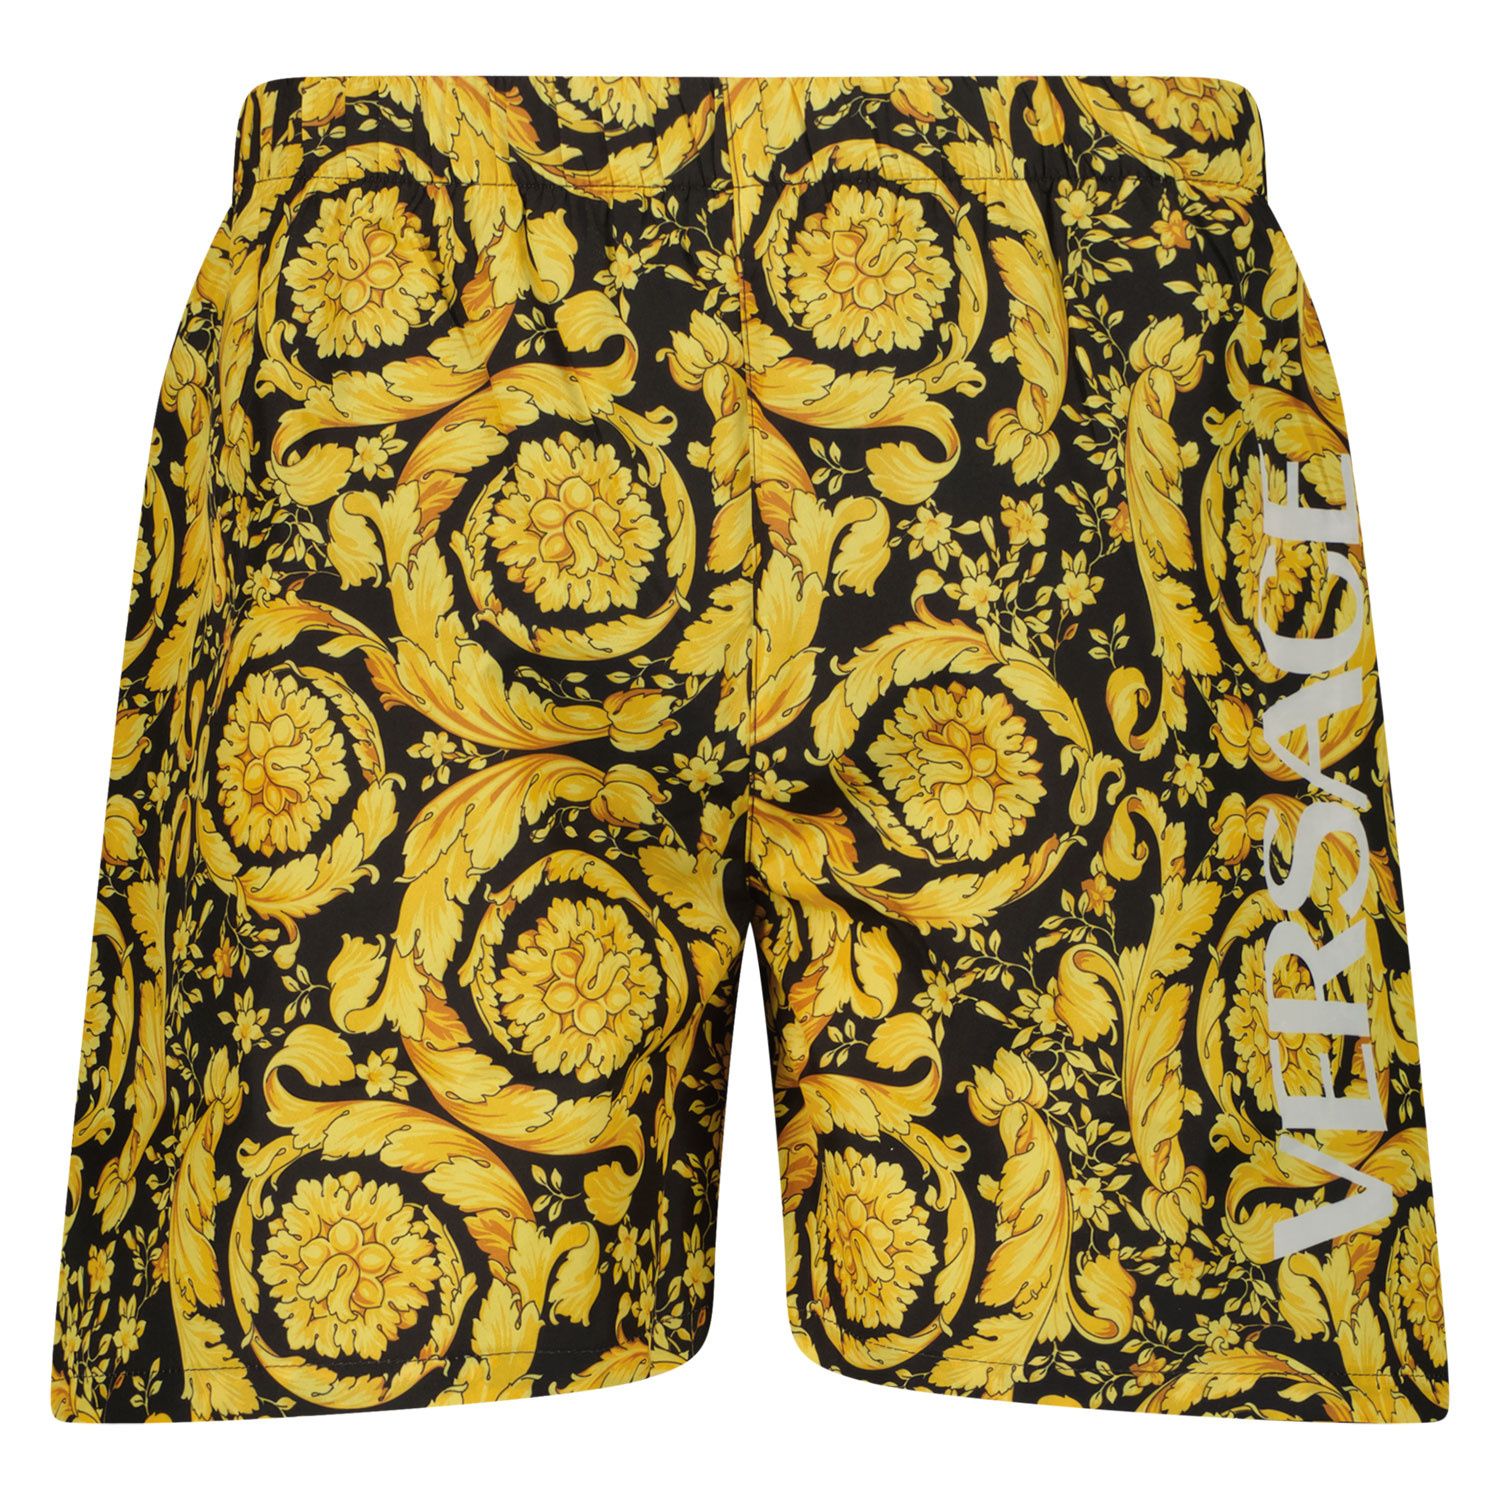 Picture of Versace 1000271 1A02640 kids swimwear gold